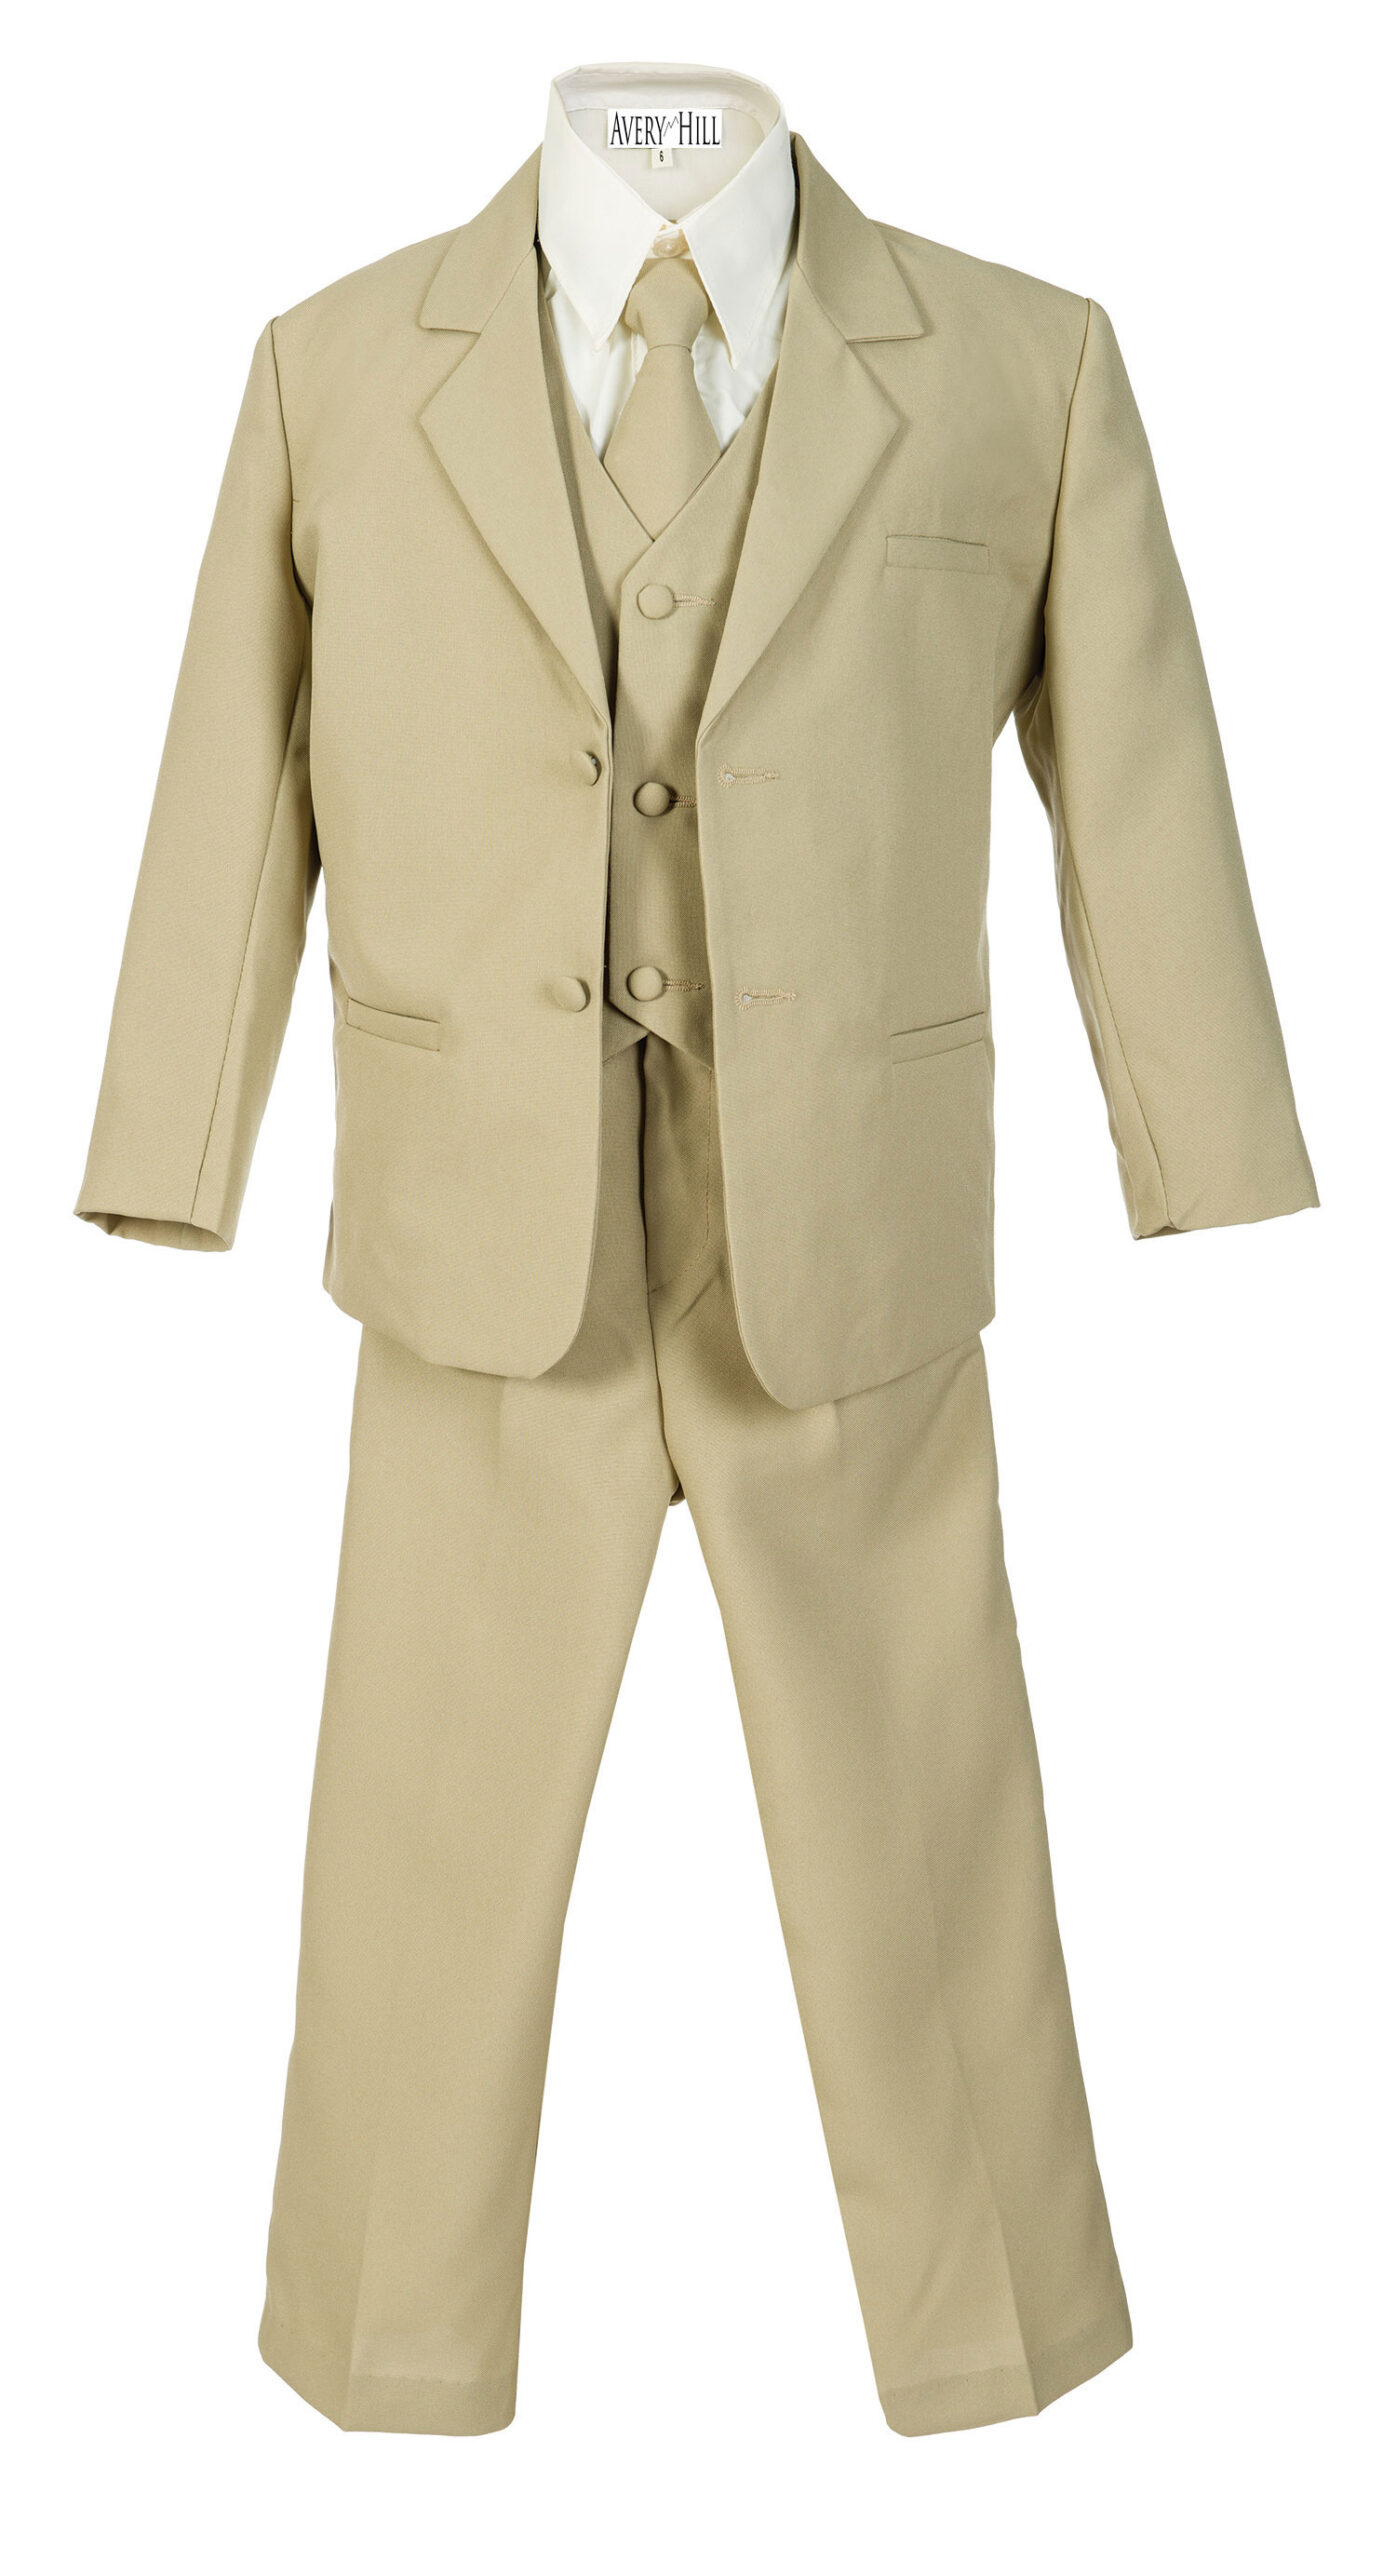 Avery Hill Boys Formal 5 Piece Suit with Shirt and Vest Khaki - 12